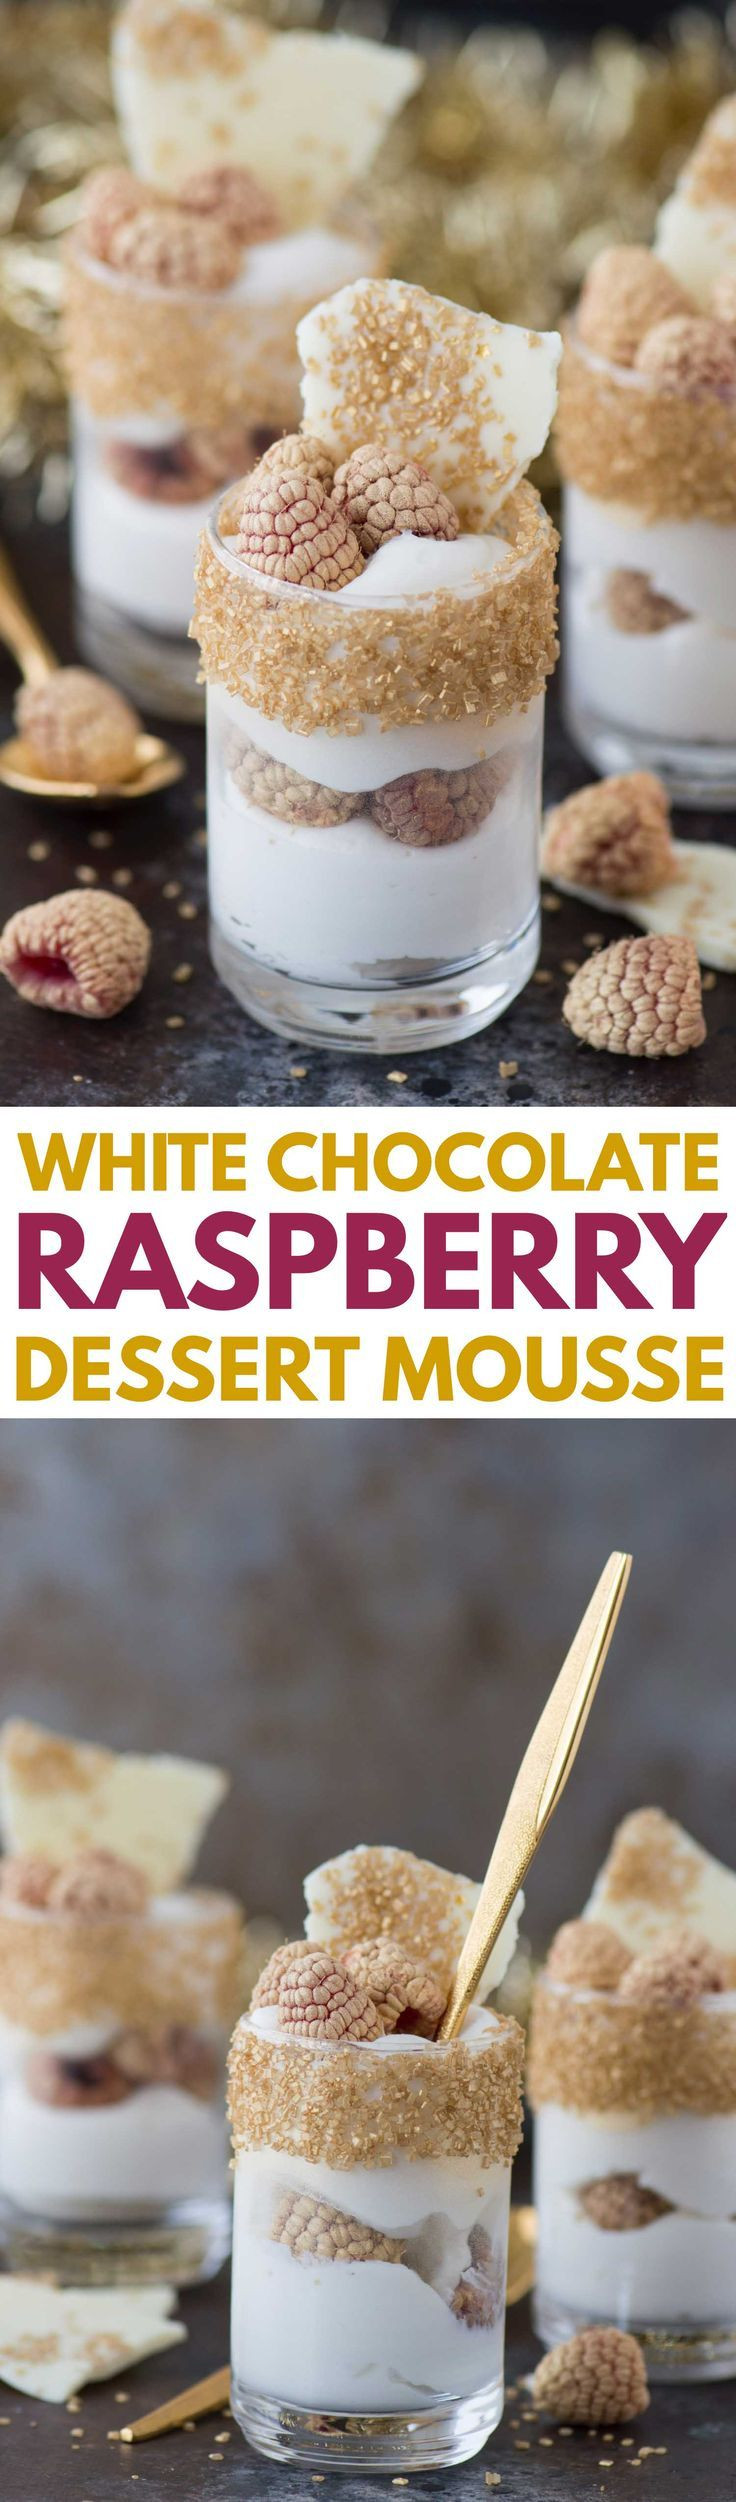 Best New Year'S Eve Desserts
 This easy white chocolate raspberry dessert mousse is the